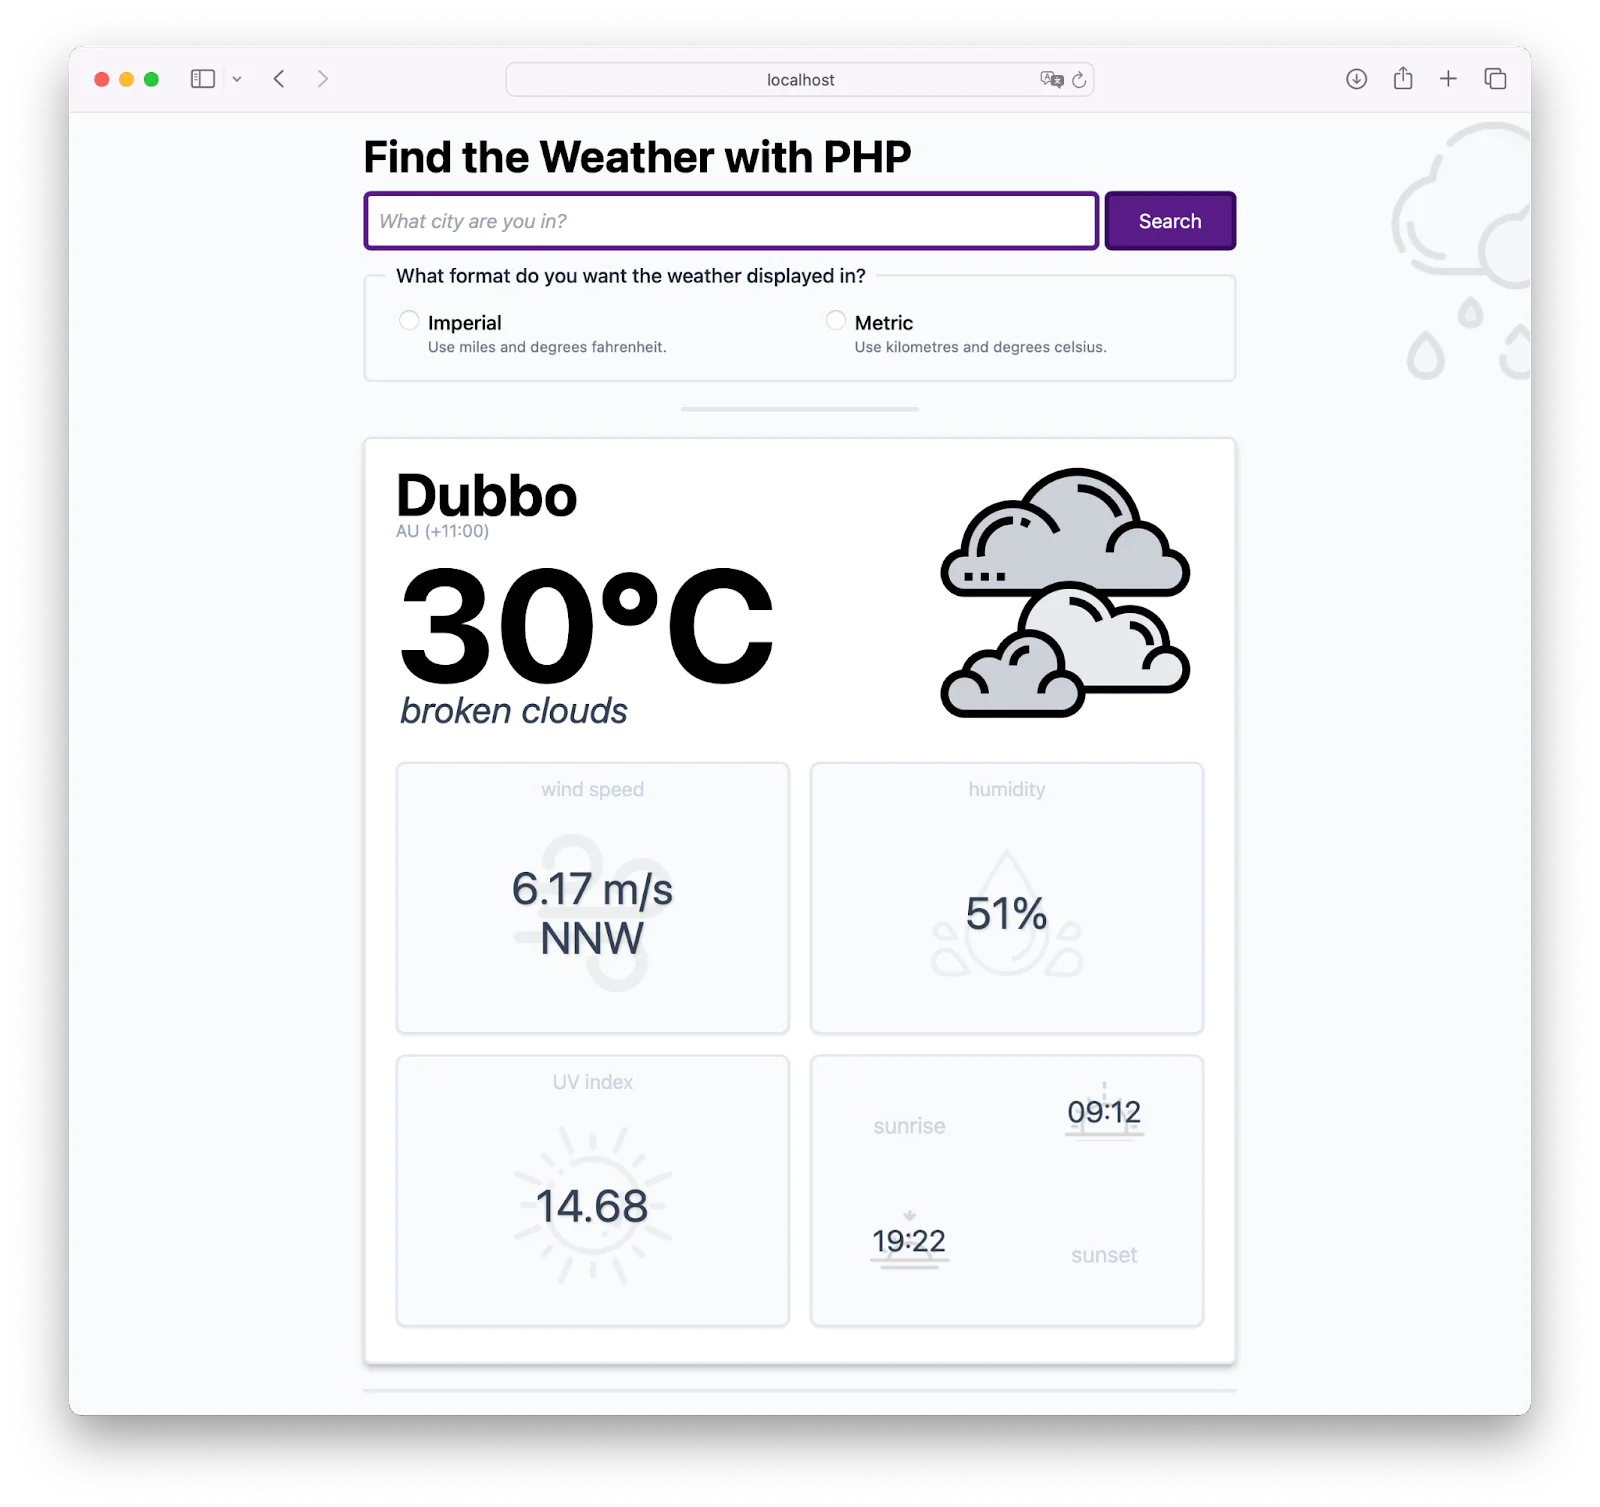 The PHP weather application, rendered in the Safari web browser, with weather data for Dubbo, NSW, Australia. It has a field to enter a city name to find the weather for at the top of the page, and a radio button for choosing either imperial or metric as the unit of measurement for the weather data. Under that, it displays the weather data, including the temperature in degrees Celsius and wind speed.